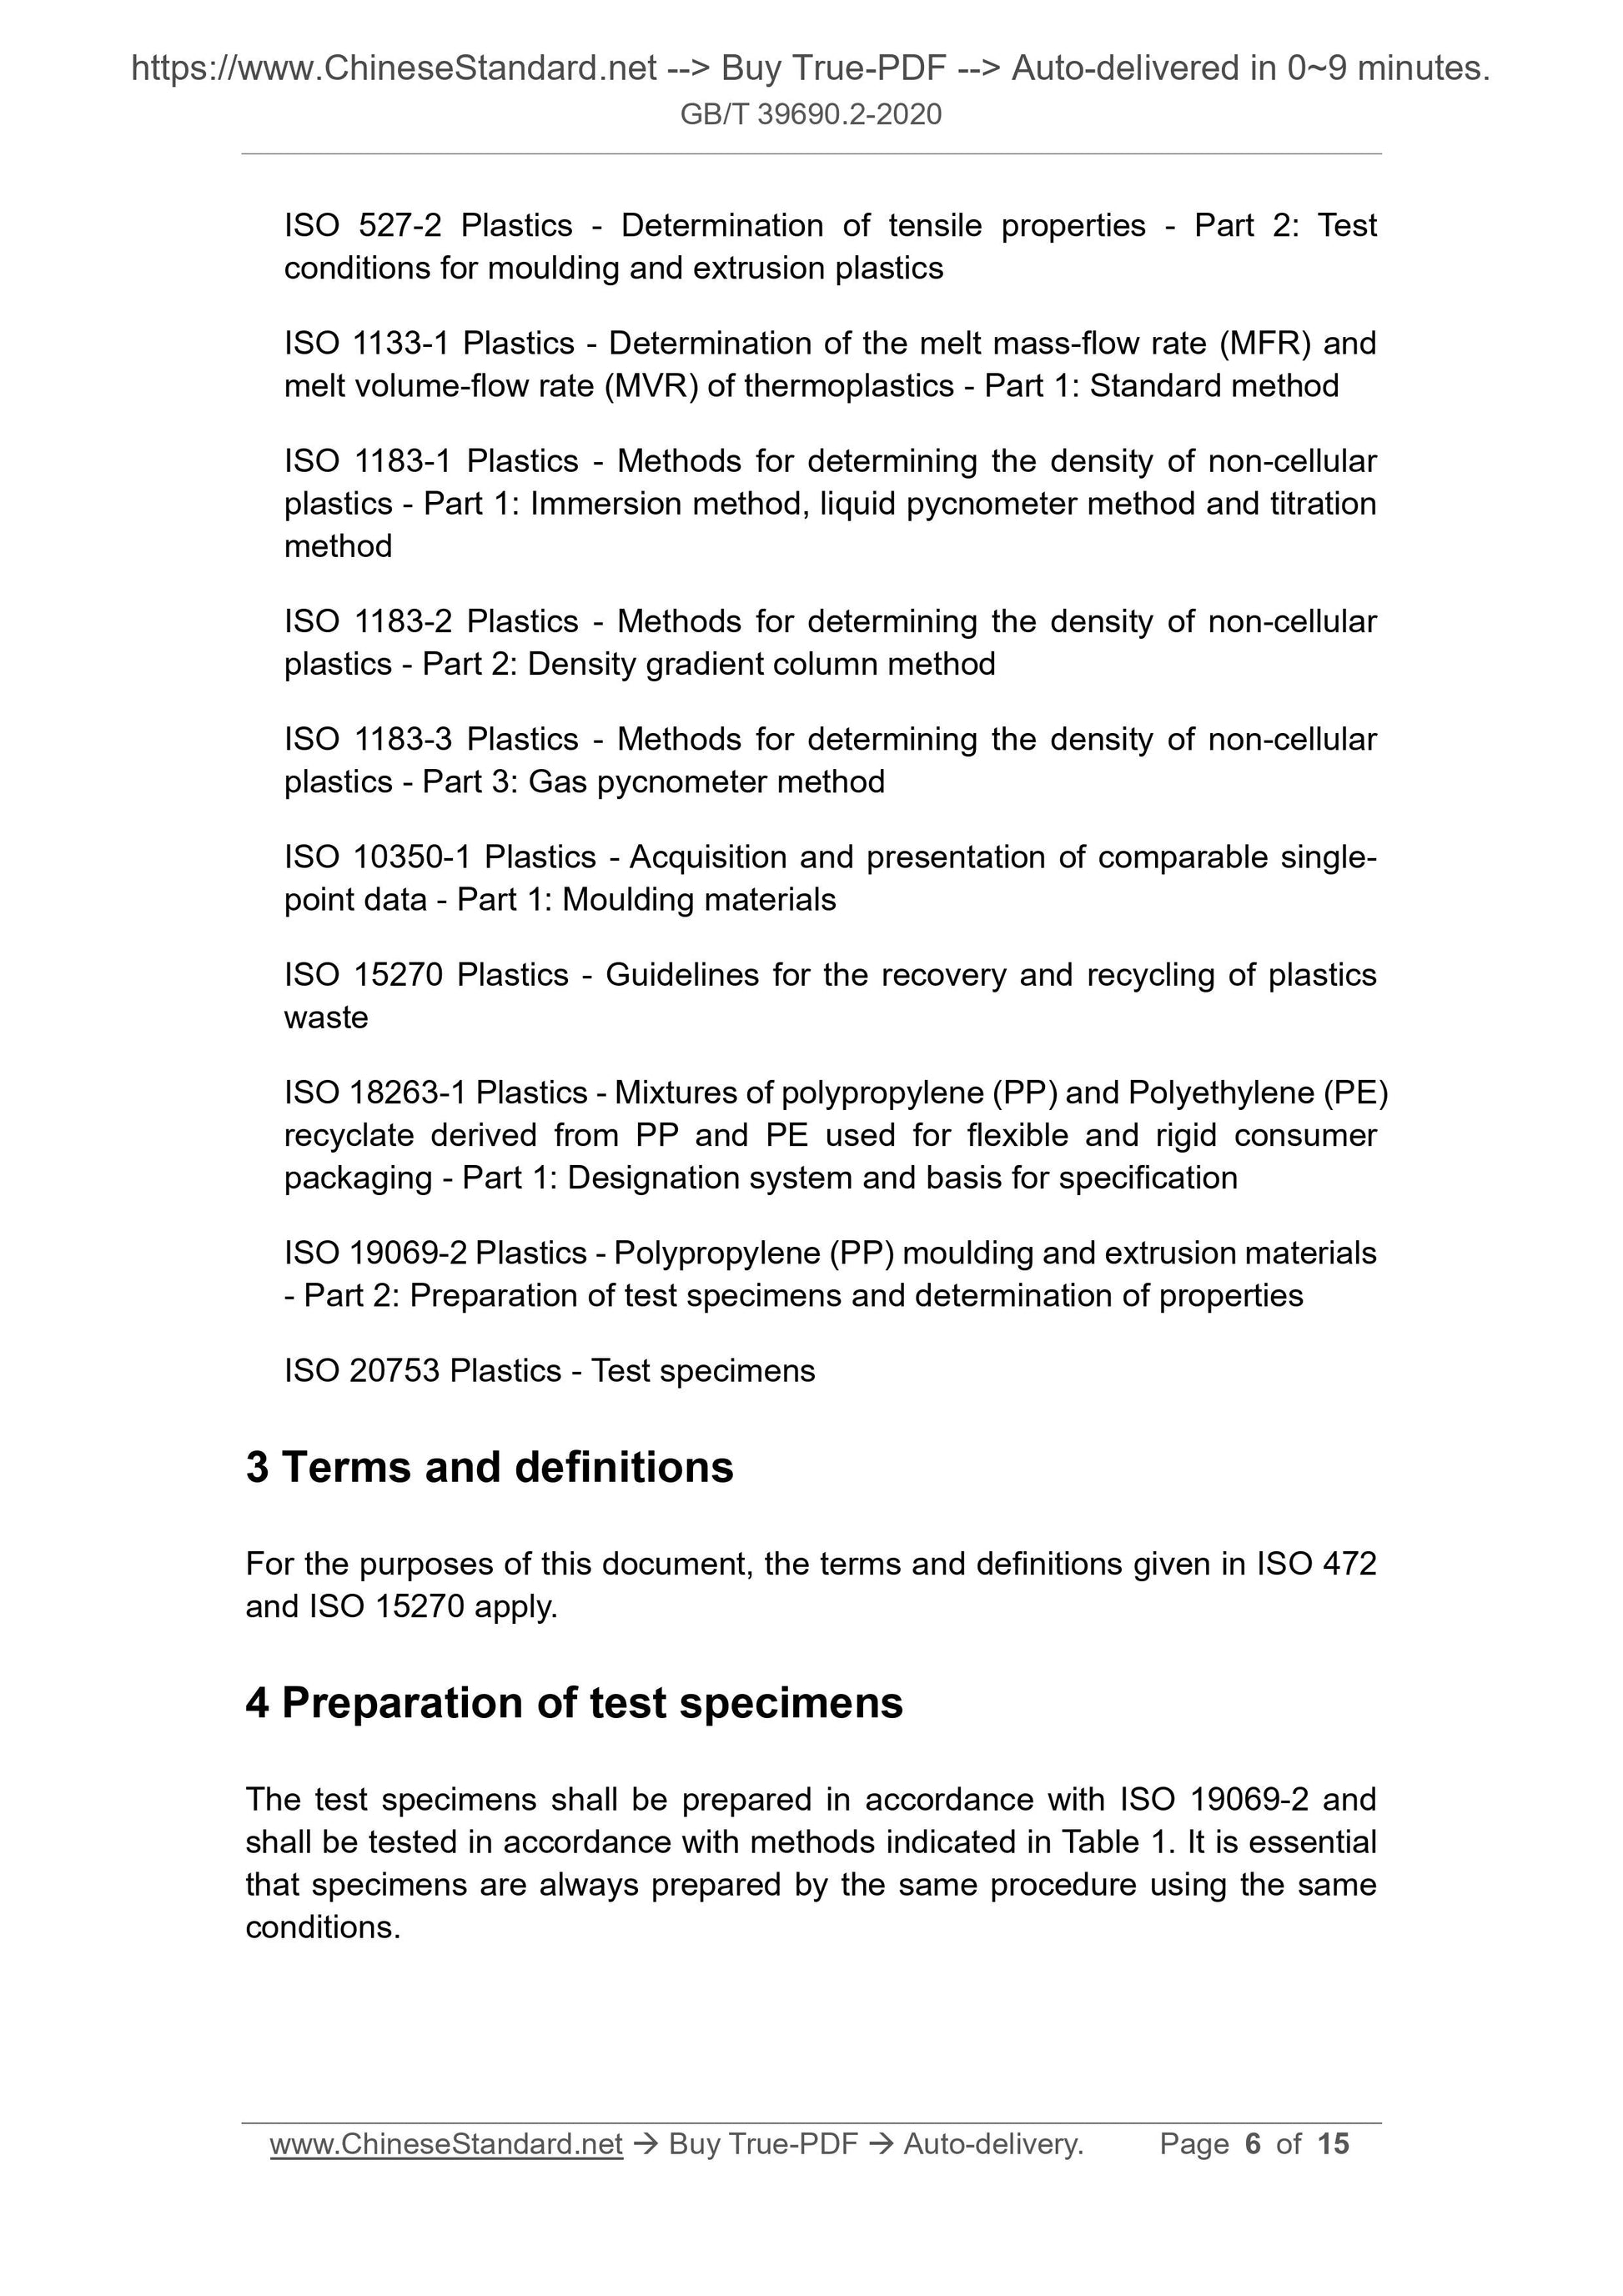 GB/T 39690.2-2020 Page 5